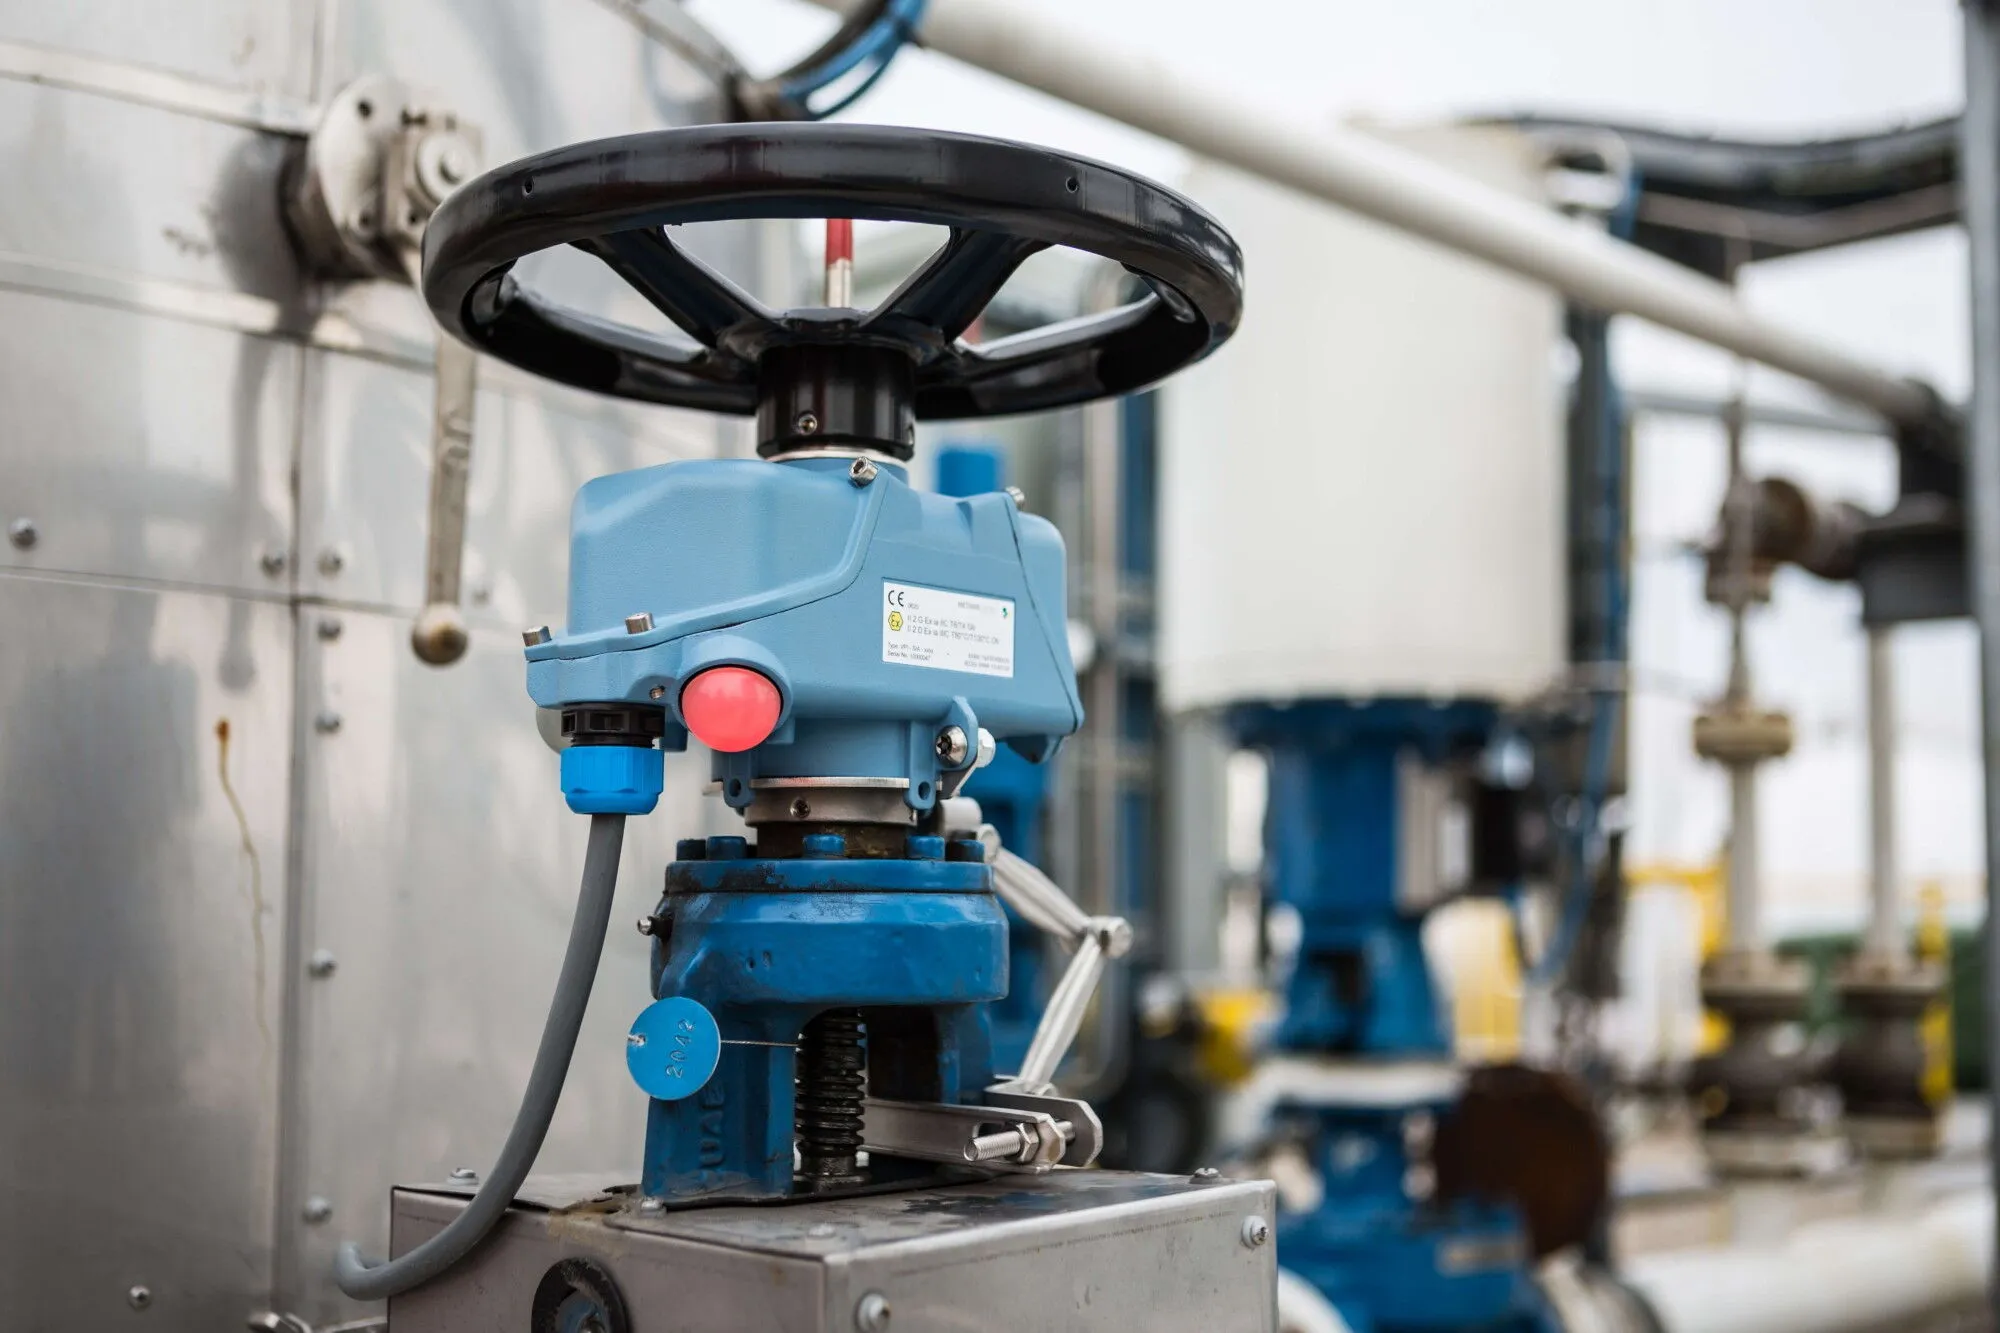 The Role of Limit Switches in Operating Control Valves